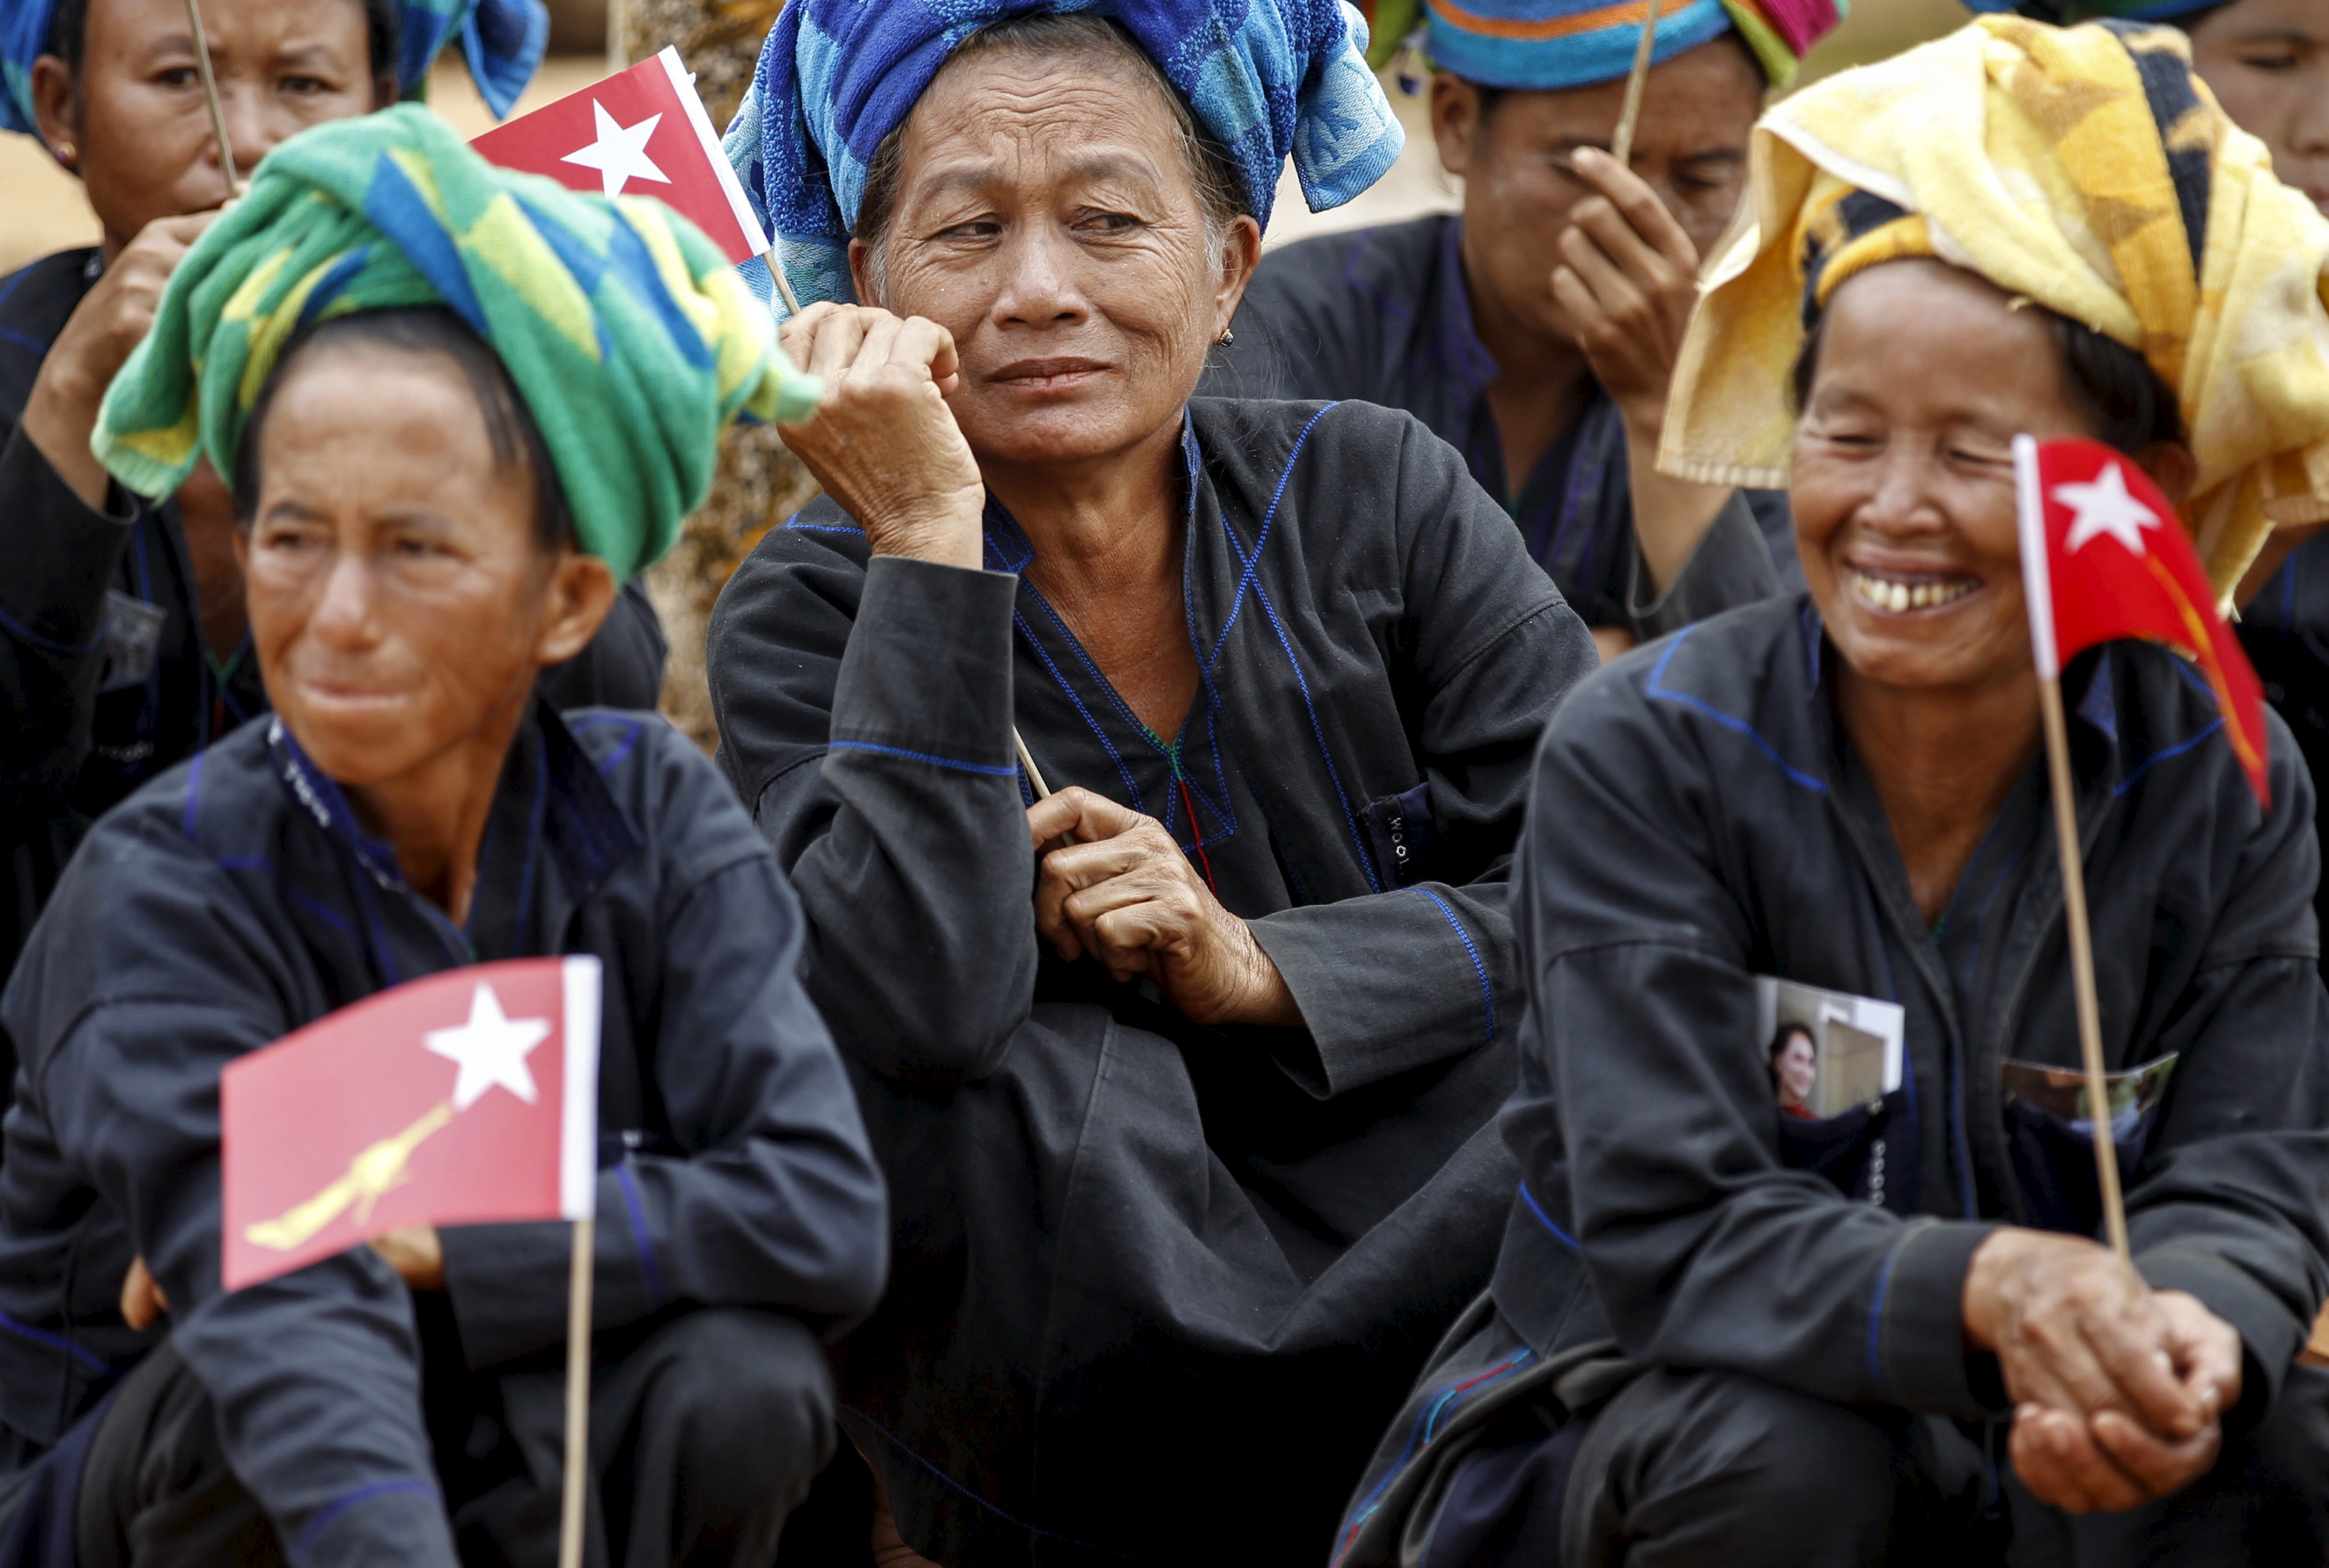 Ethnic Pa'O women sit as they wait for Myanmar pro-democracy leader Aung San Suu Kyi to arrive to speak on voter education at the Hsiseng township in Shan state, Myanmar